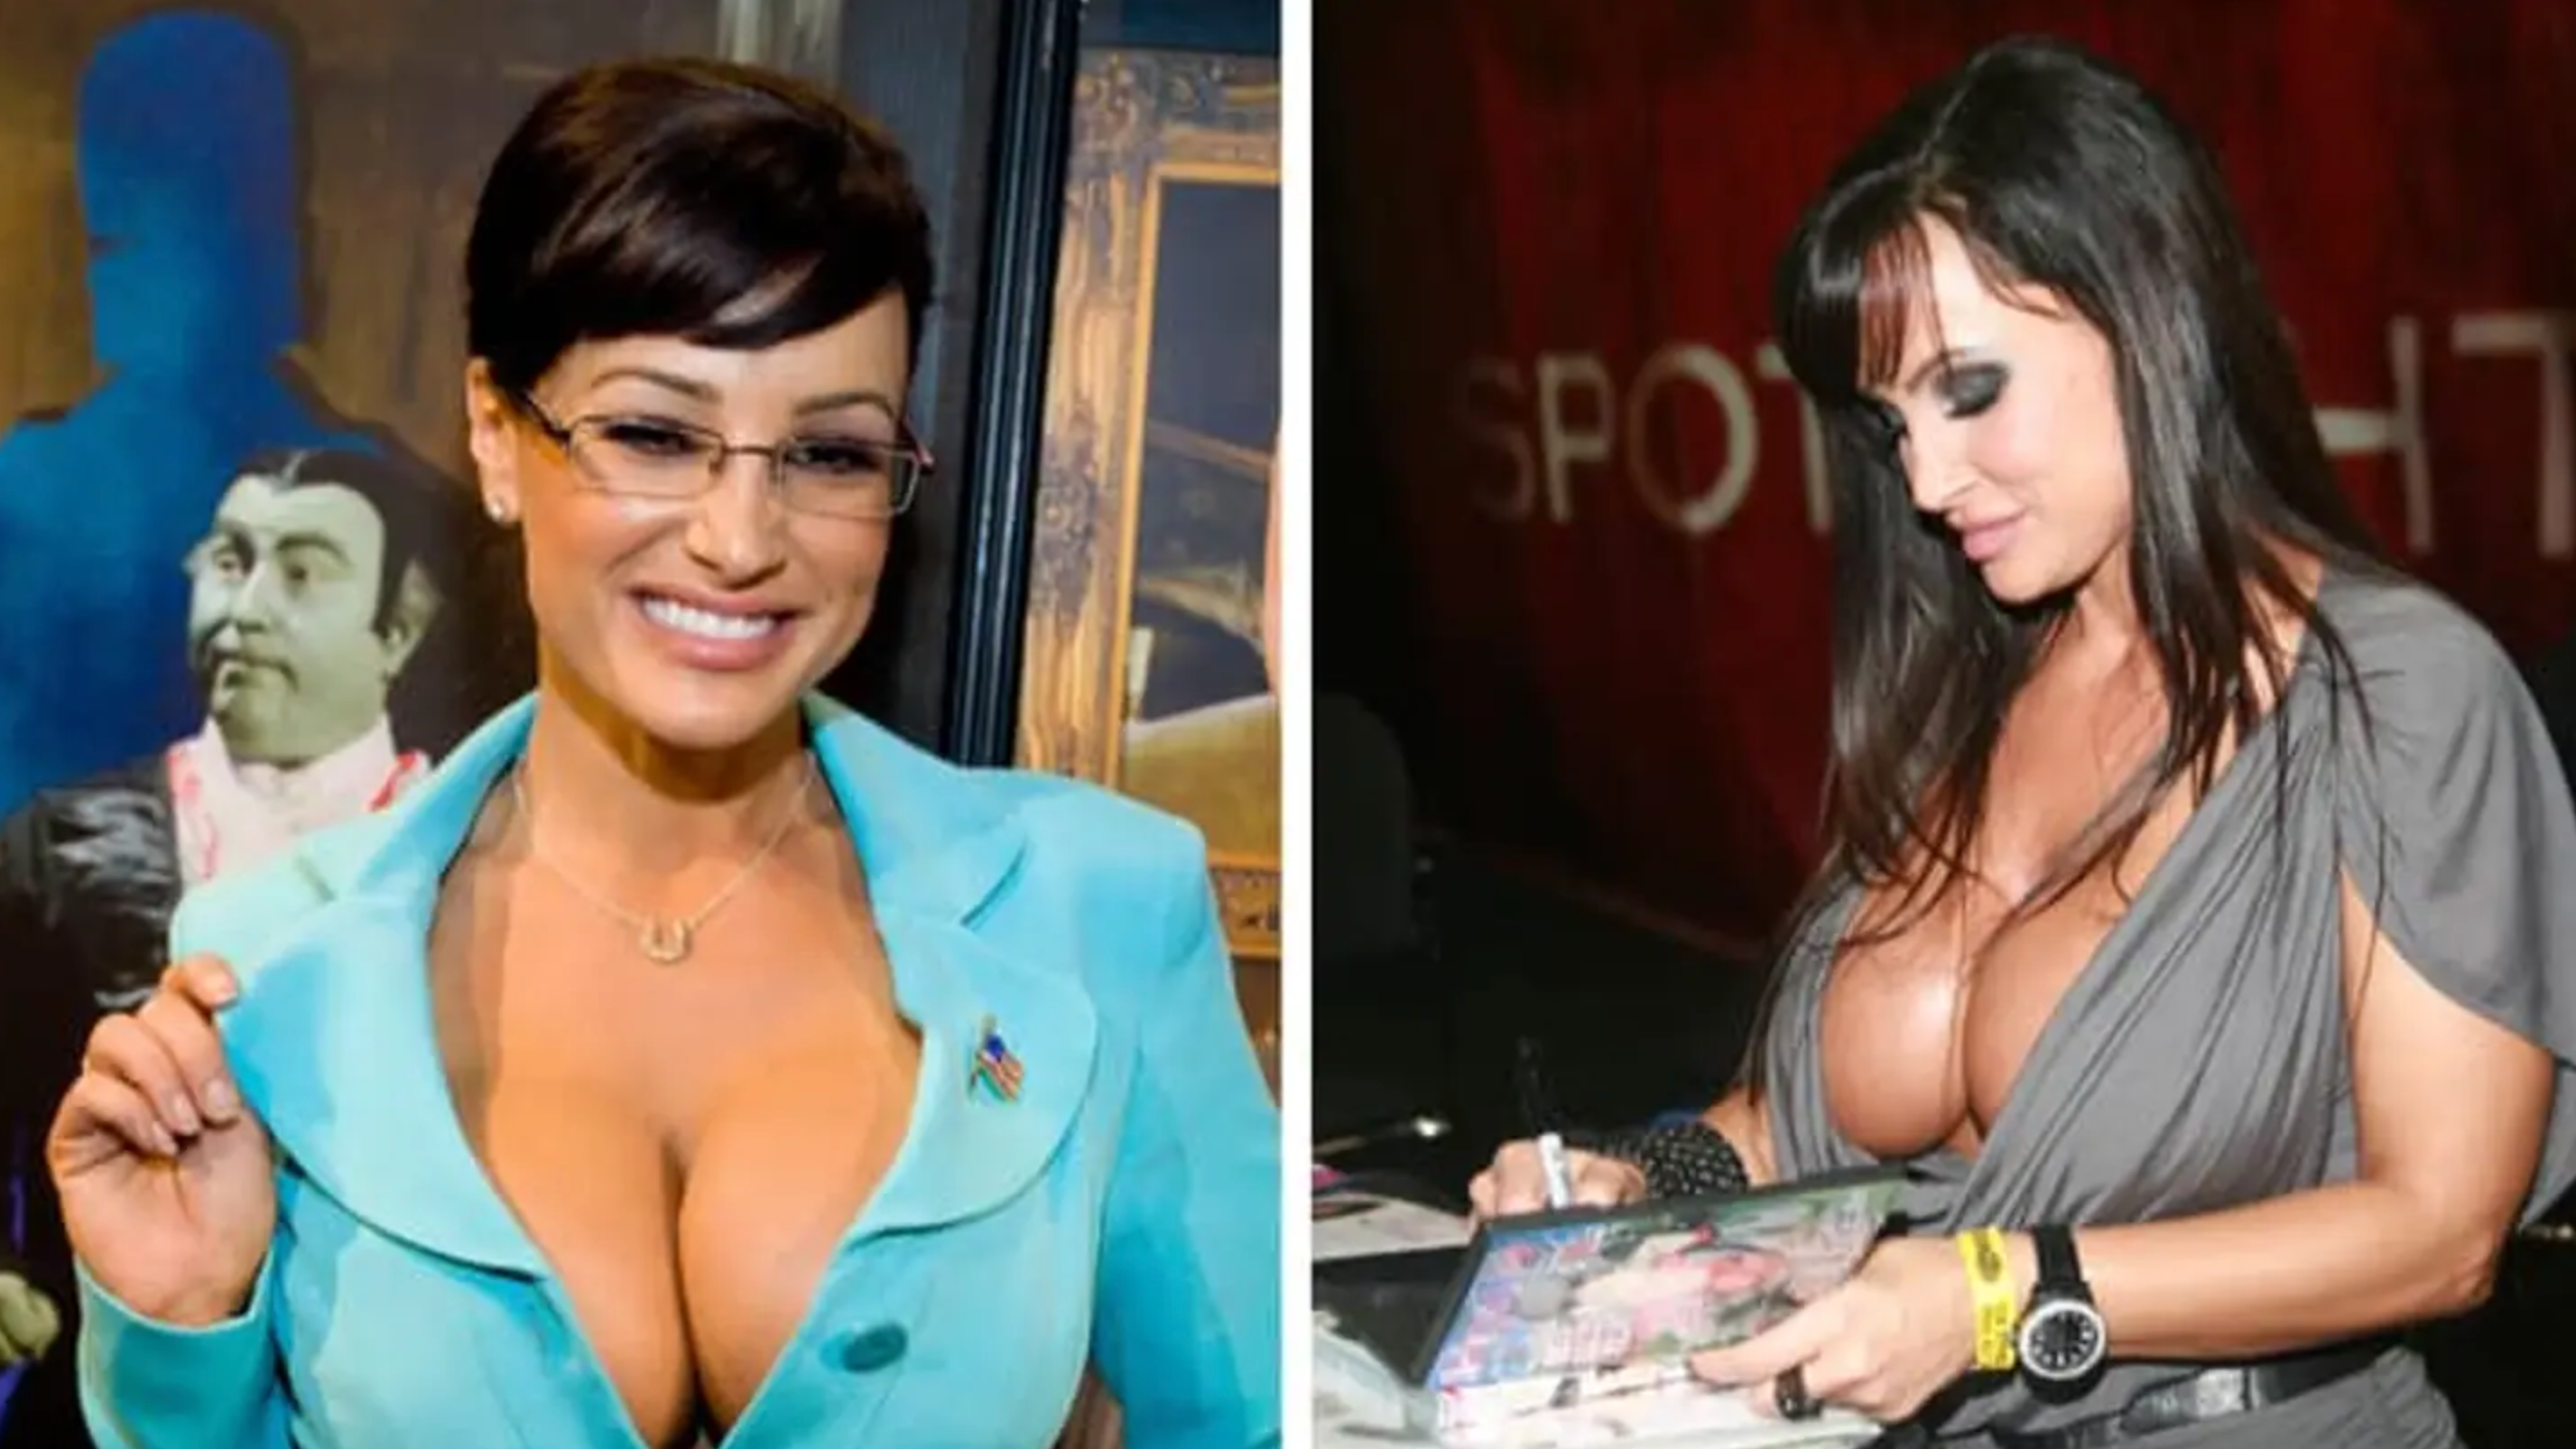 Lisa Ann College - Lisa Ann reveals which athletes are the best in the bedroom